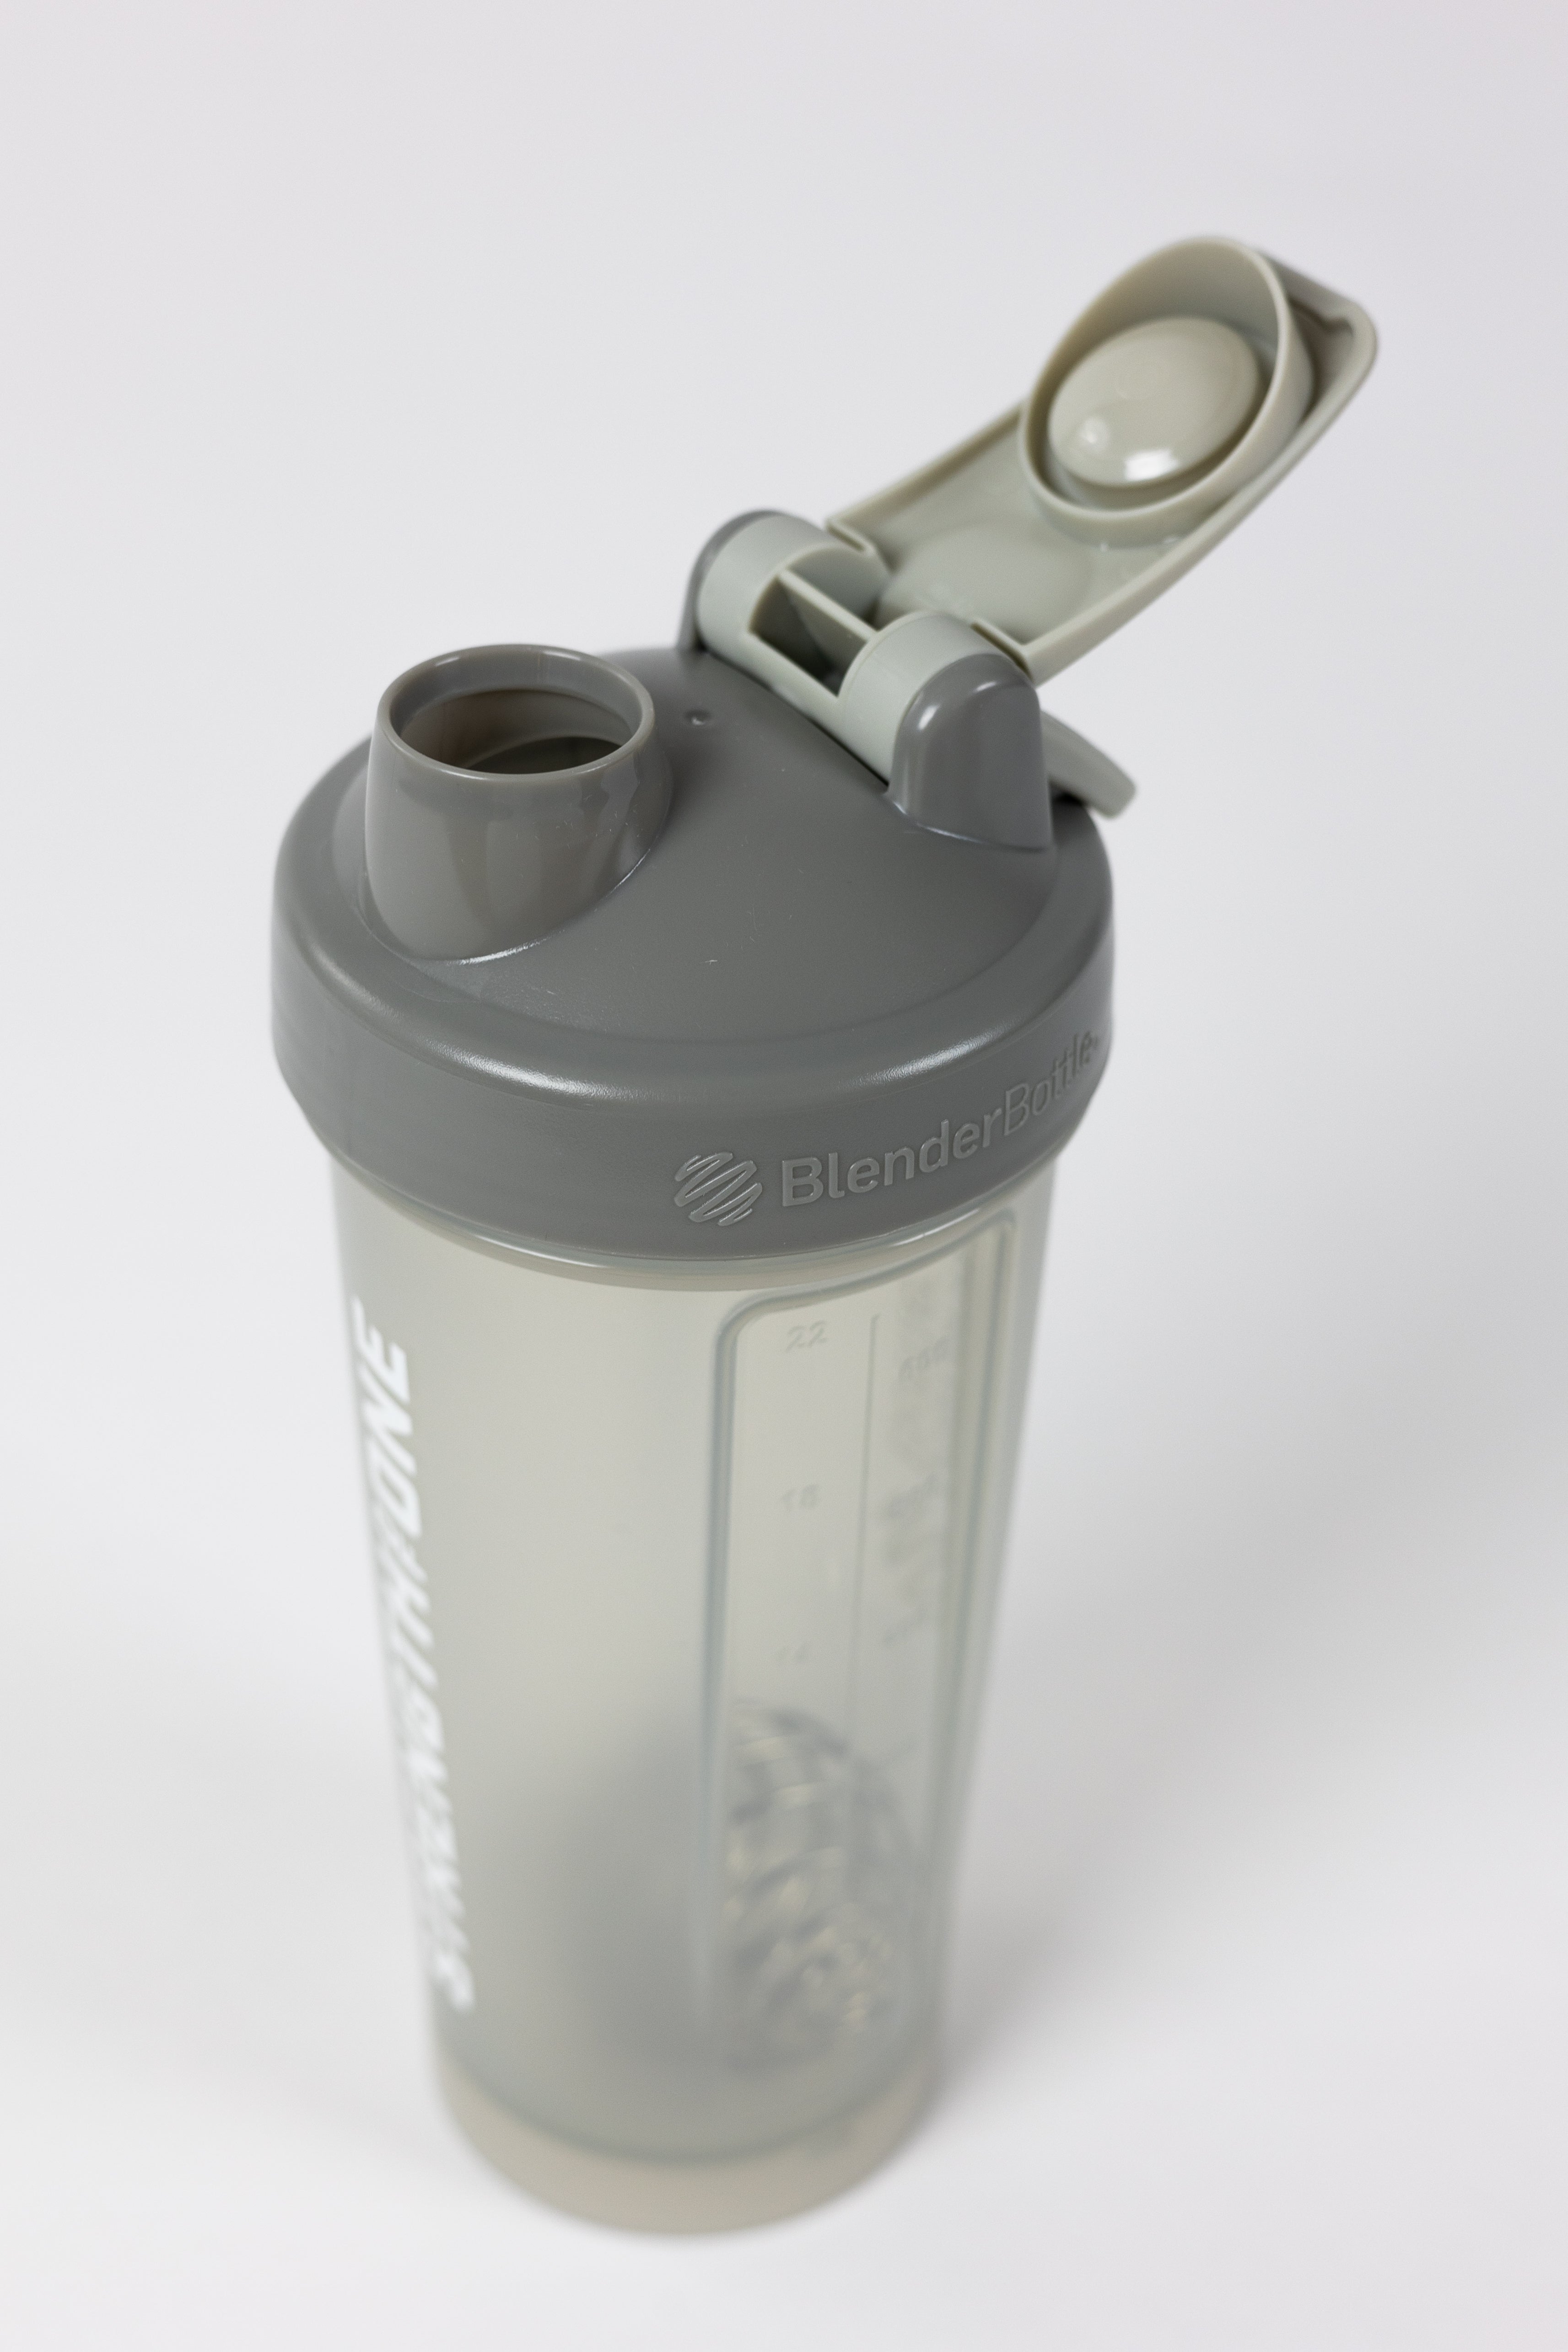 A shaker bottle with the word "Strength Of One" on it, perfect for mixing protein shakes and staying fit.